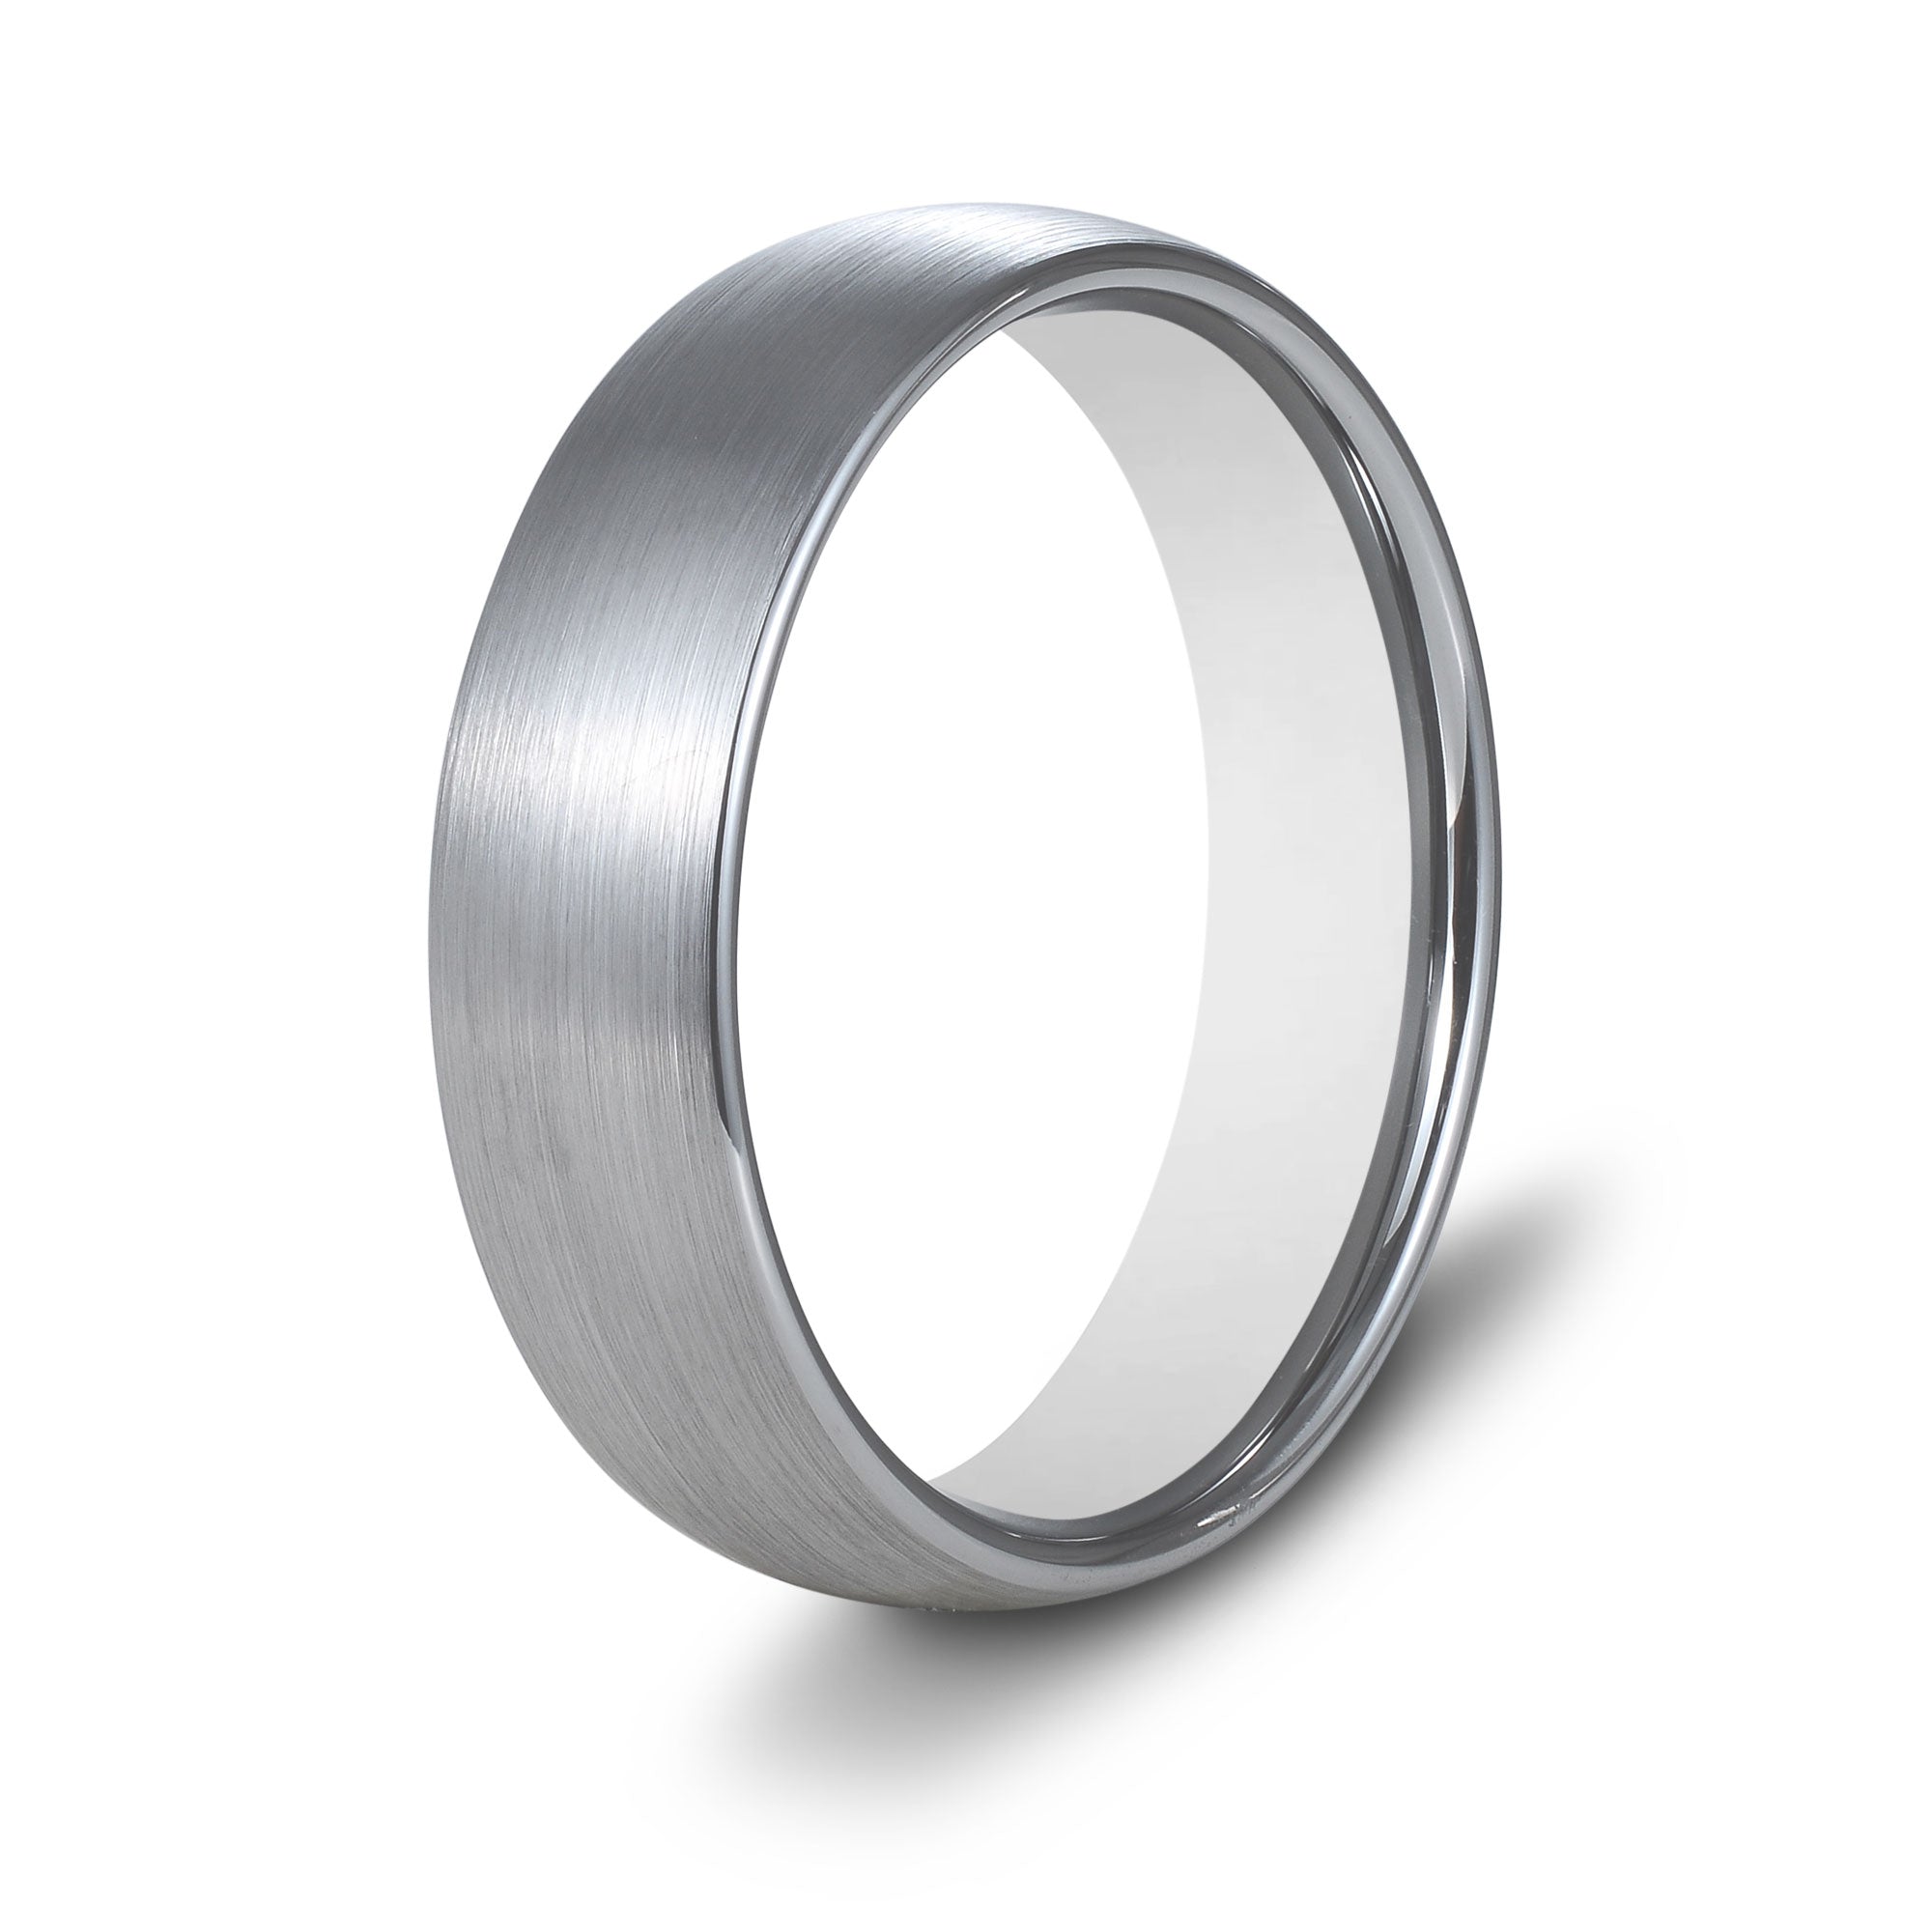 The Hero - Silver 6mm Brushed Tungsten Ring